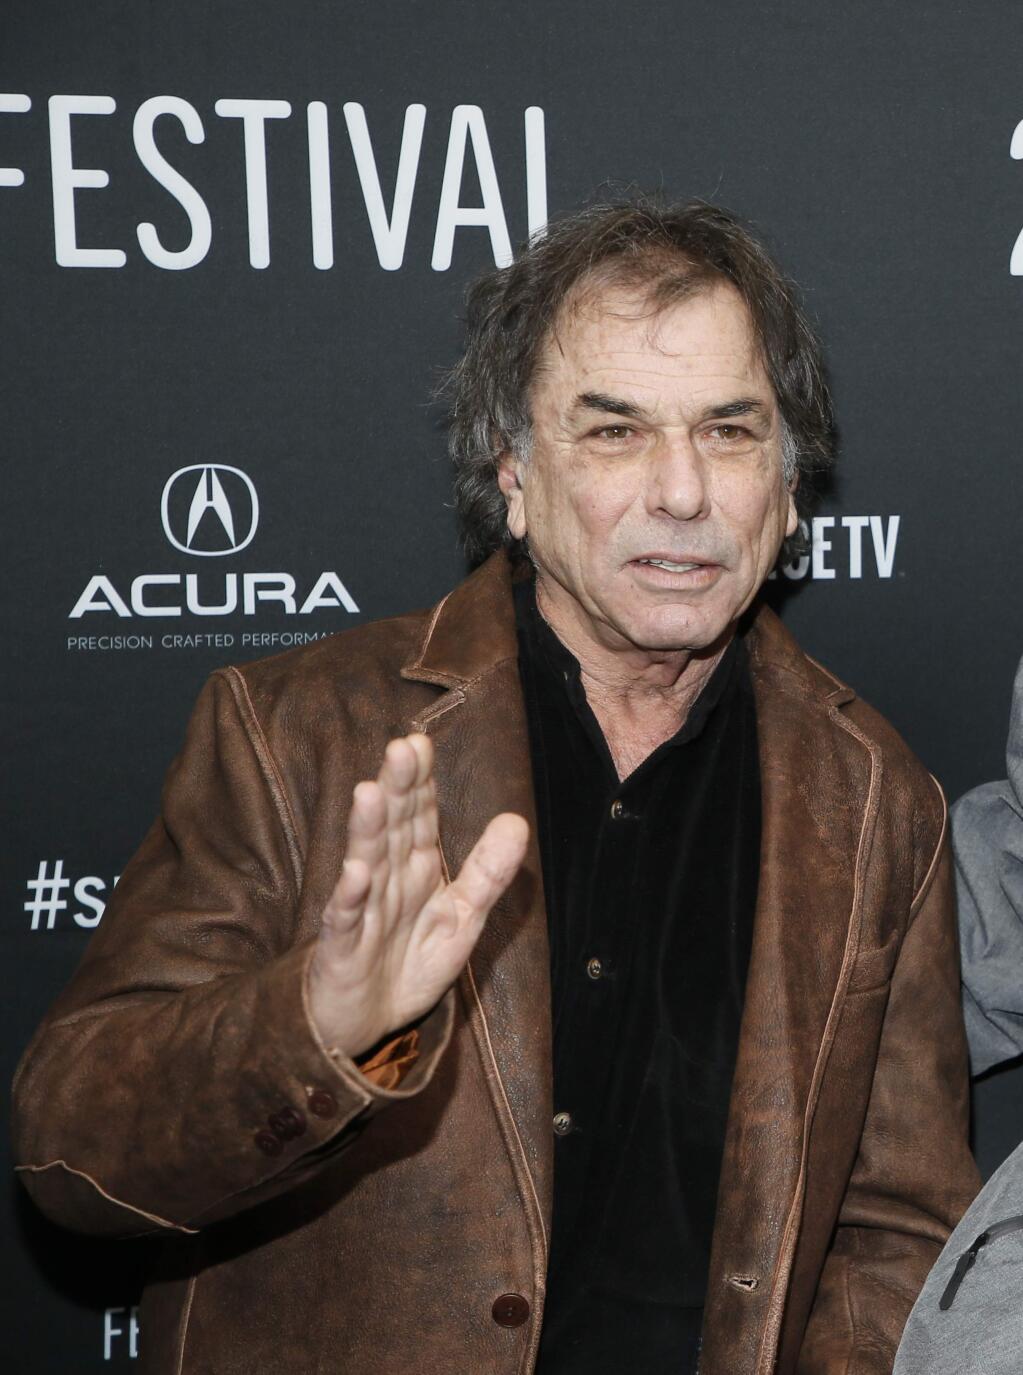 Mickey Hart poses at the premiere of 'Long Strange Trip,' a documentary about the Grateful Dead rock group, during the 2017 Sundance Film Festival on Monday, Jan. 23, 2017, in Park City, Utah. (Photo by Danny Moloshok/Invision/AP)